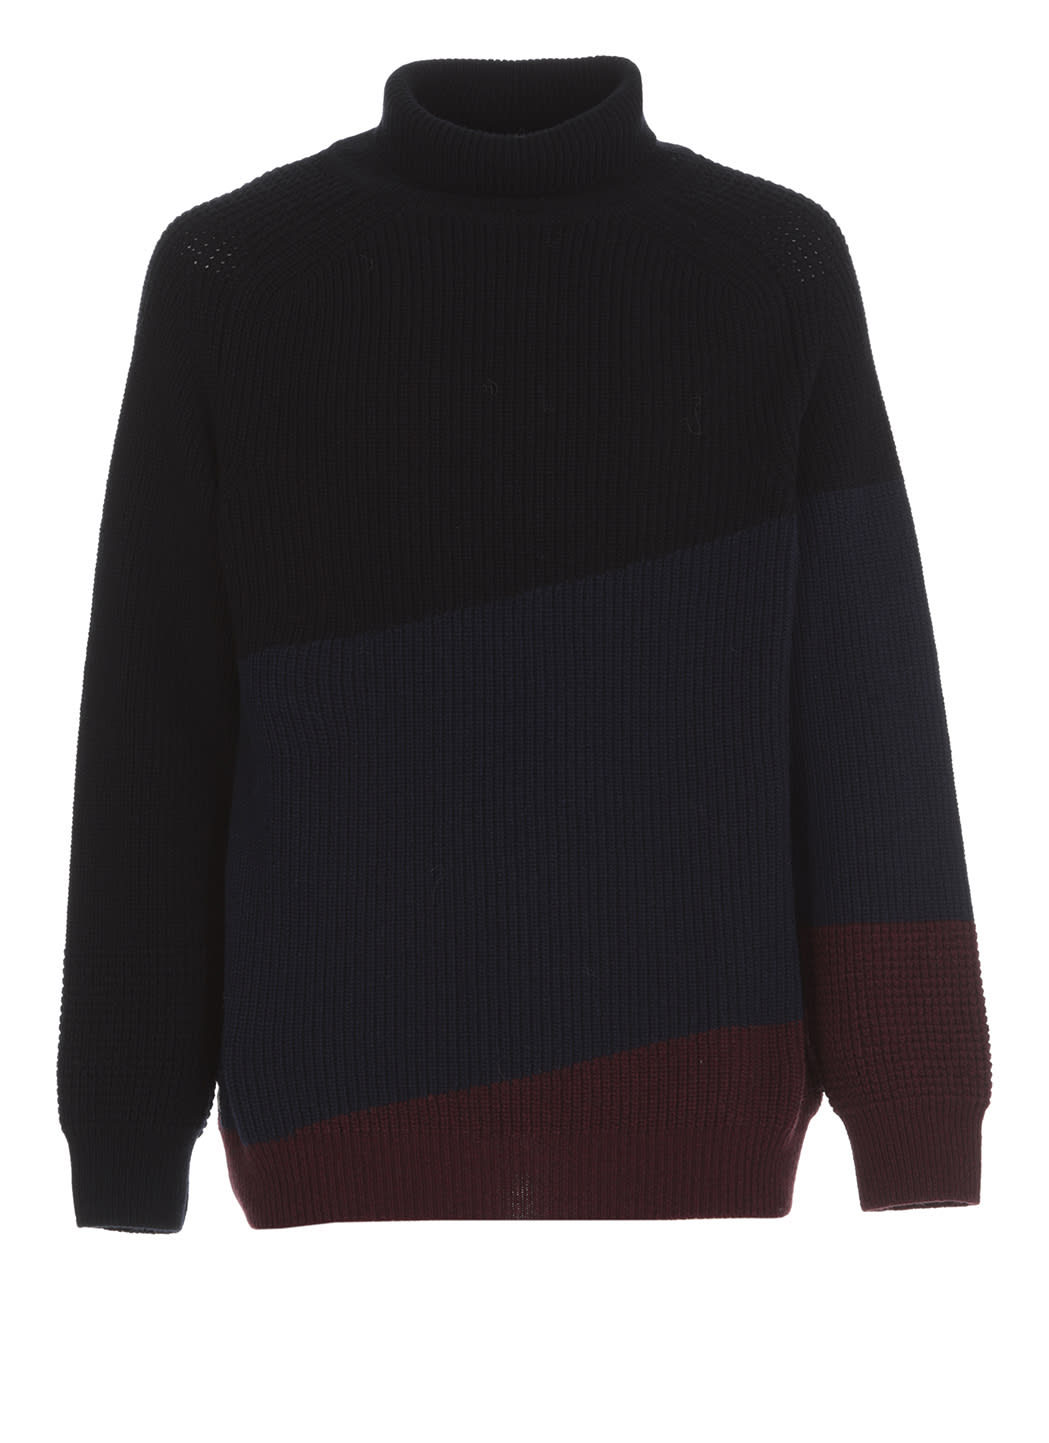 PS by Paul Smith Wool Sweater